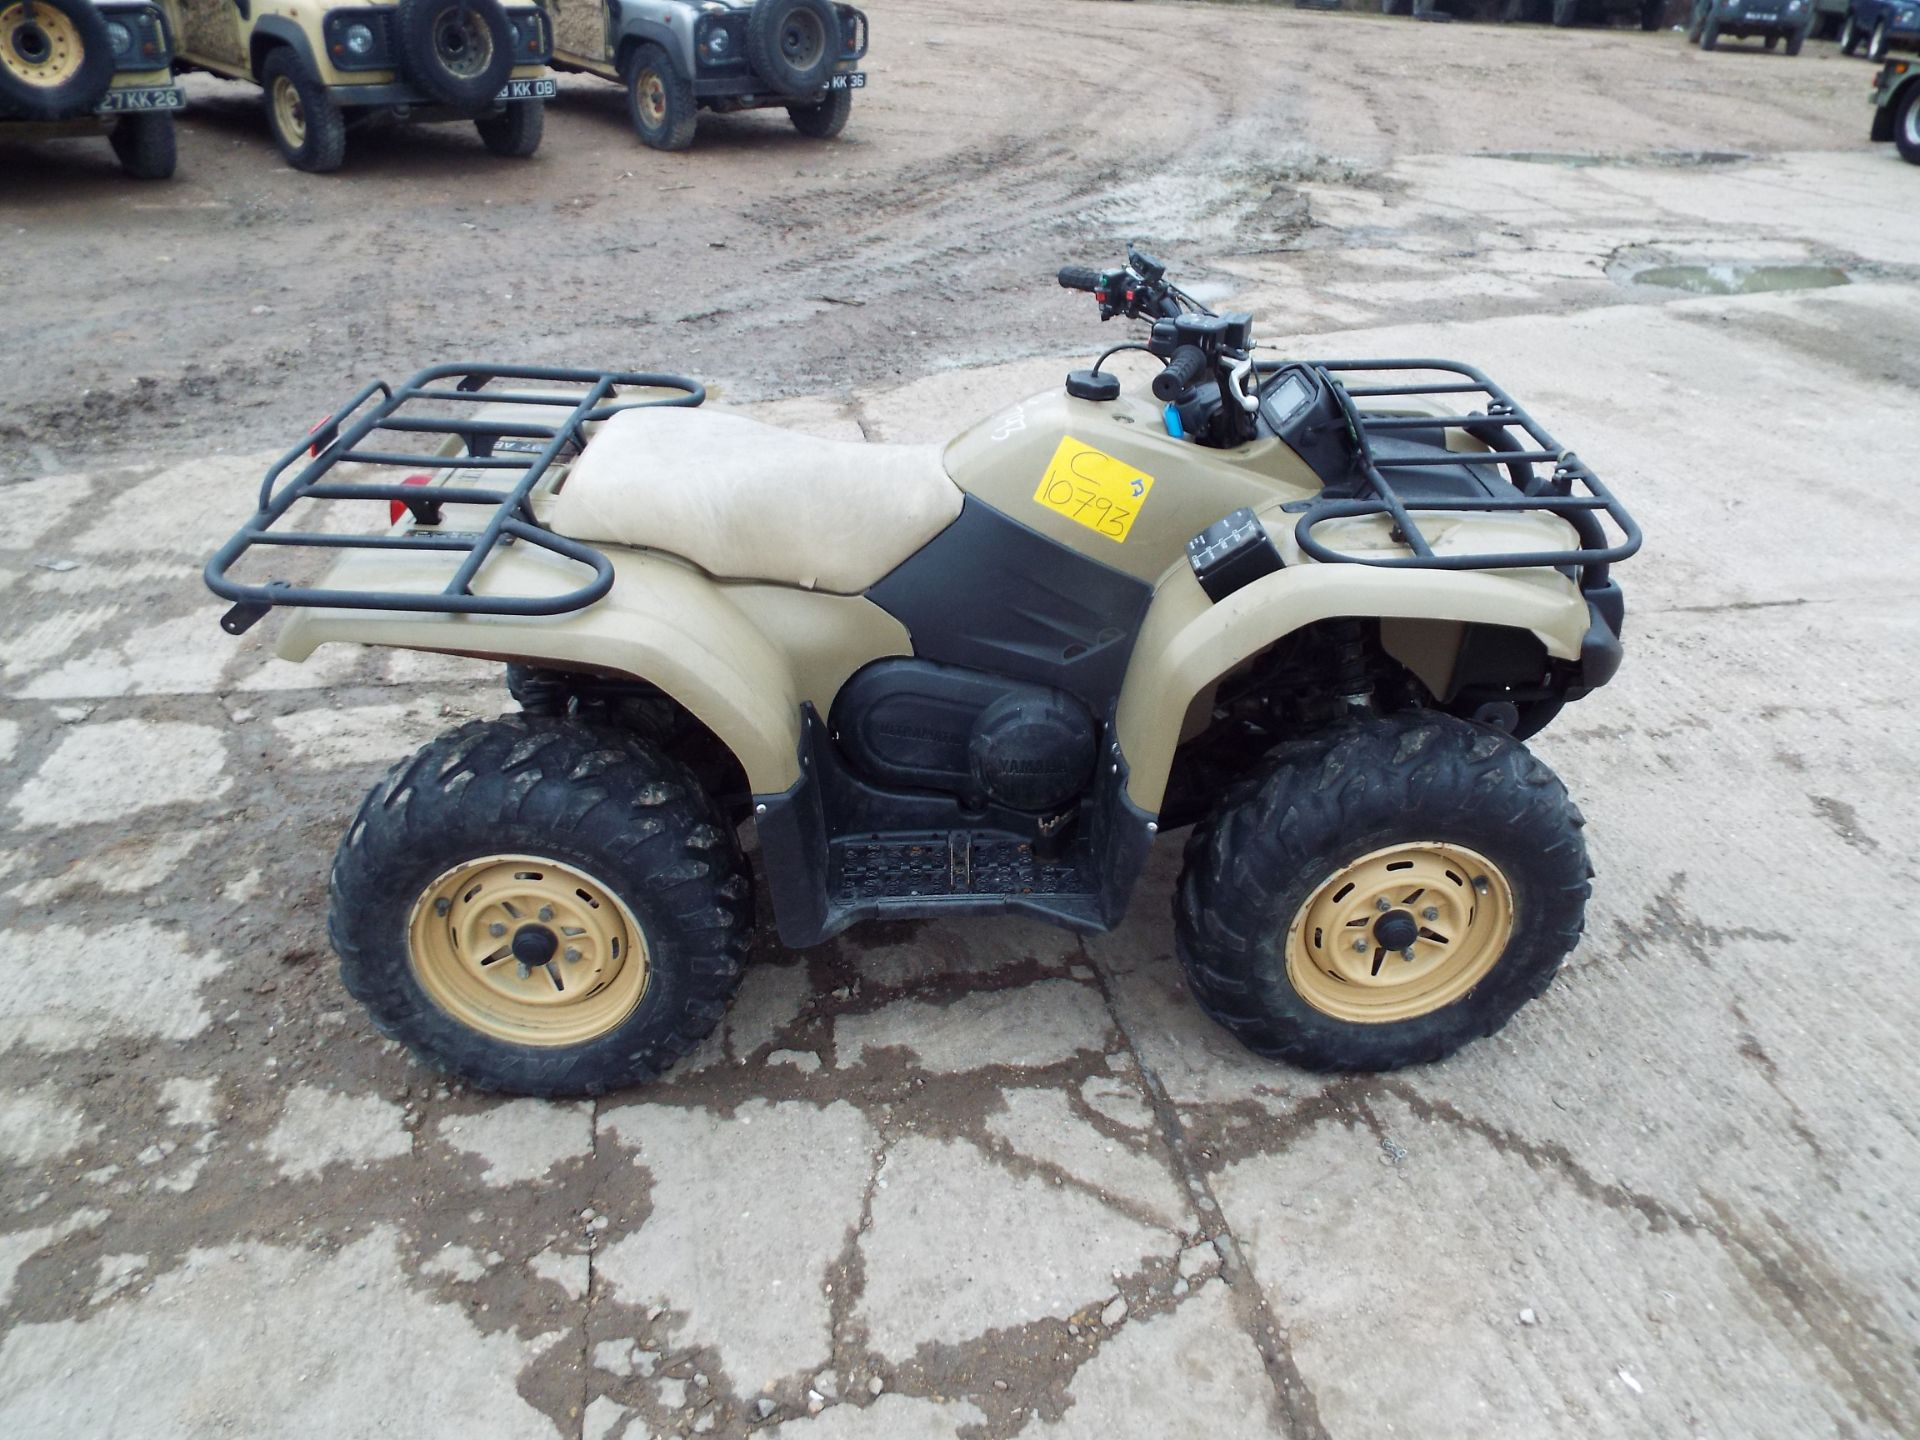 Military Specification Yamaha Grizzly 450 4 x 4 ATV Quad Bike Complete with Winch - Image 8 of 20